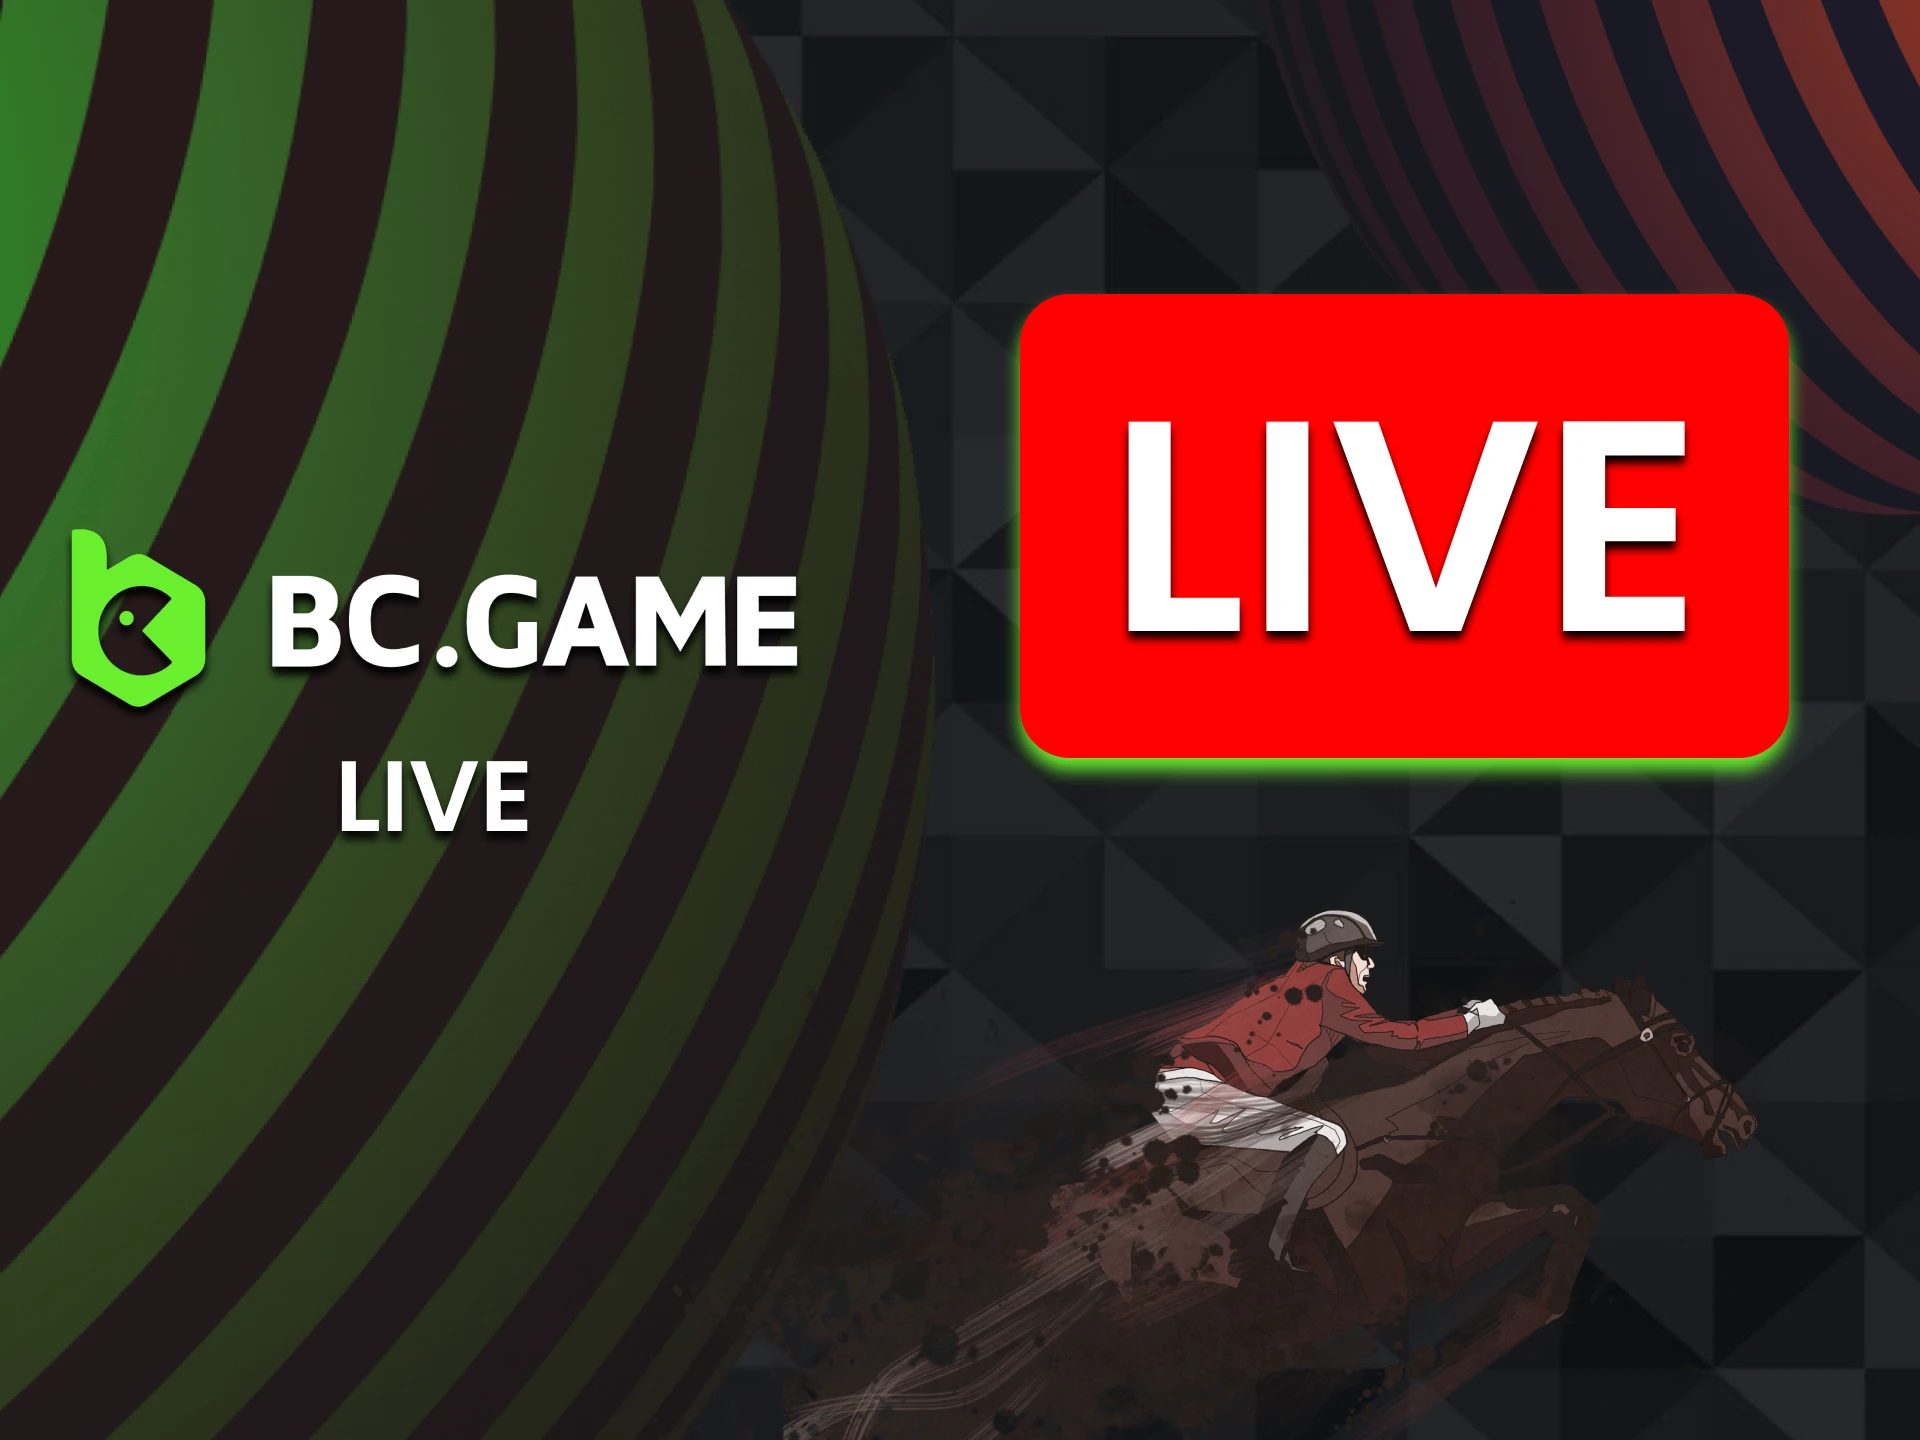 You can bet on live horse racing events with BC Game.